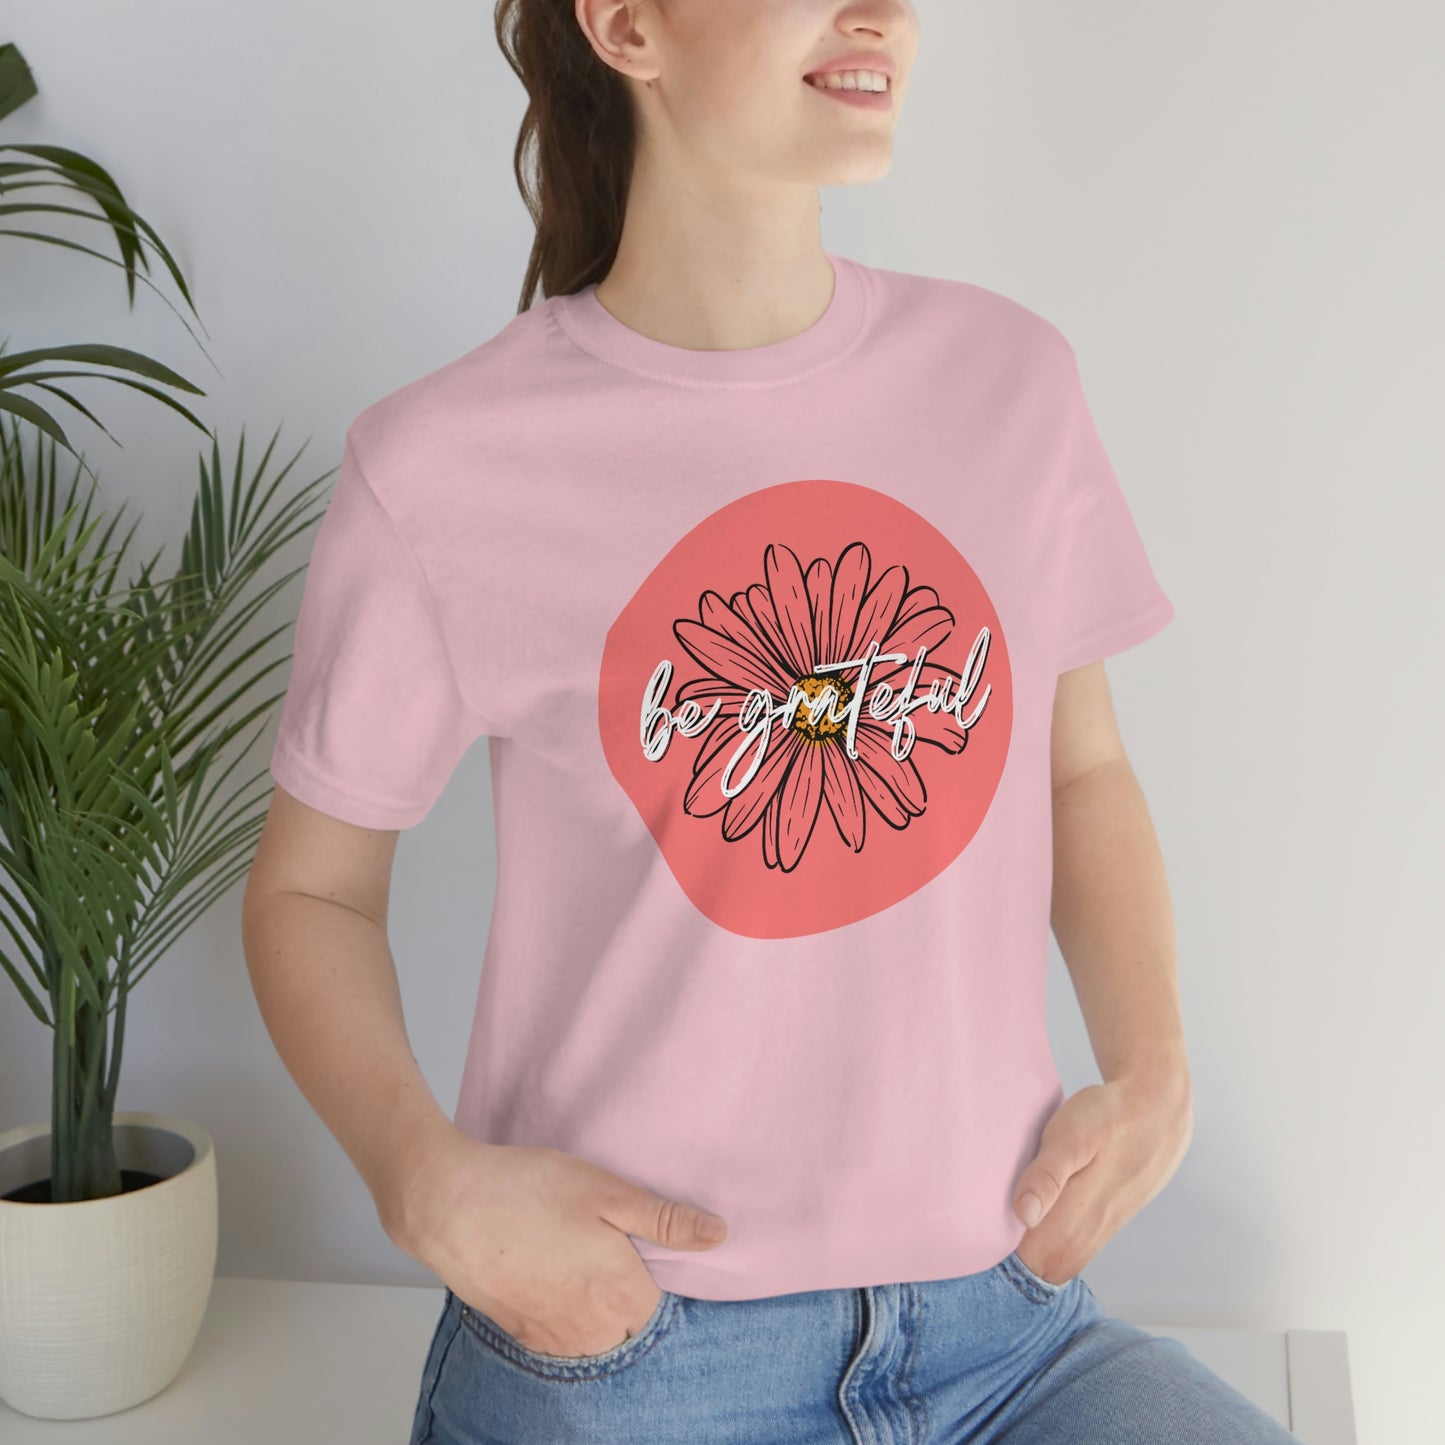 Be Grateful Coral Daisy Floral Positive Message Unisex Jersey Short Sleeve Tee Small-3XL